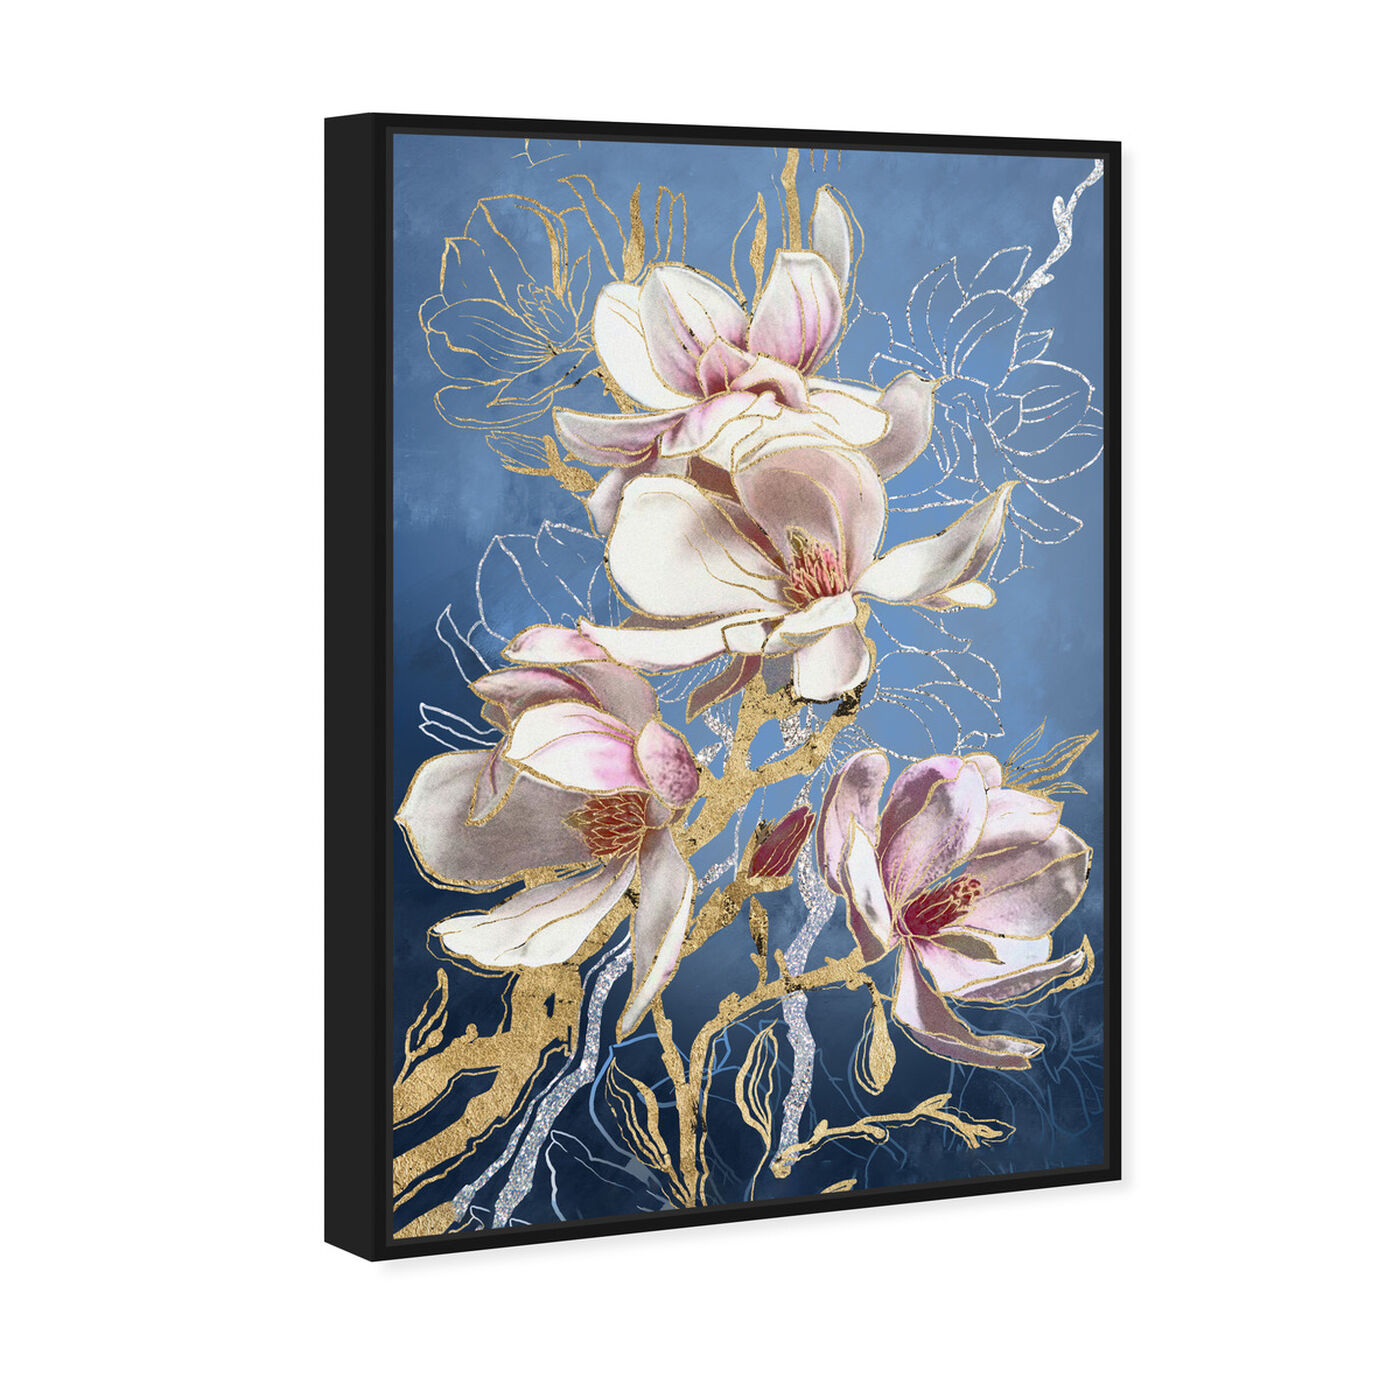 Modern Van Gogh | Floral and Botanical Wall Art by The Oliver Gal